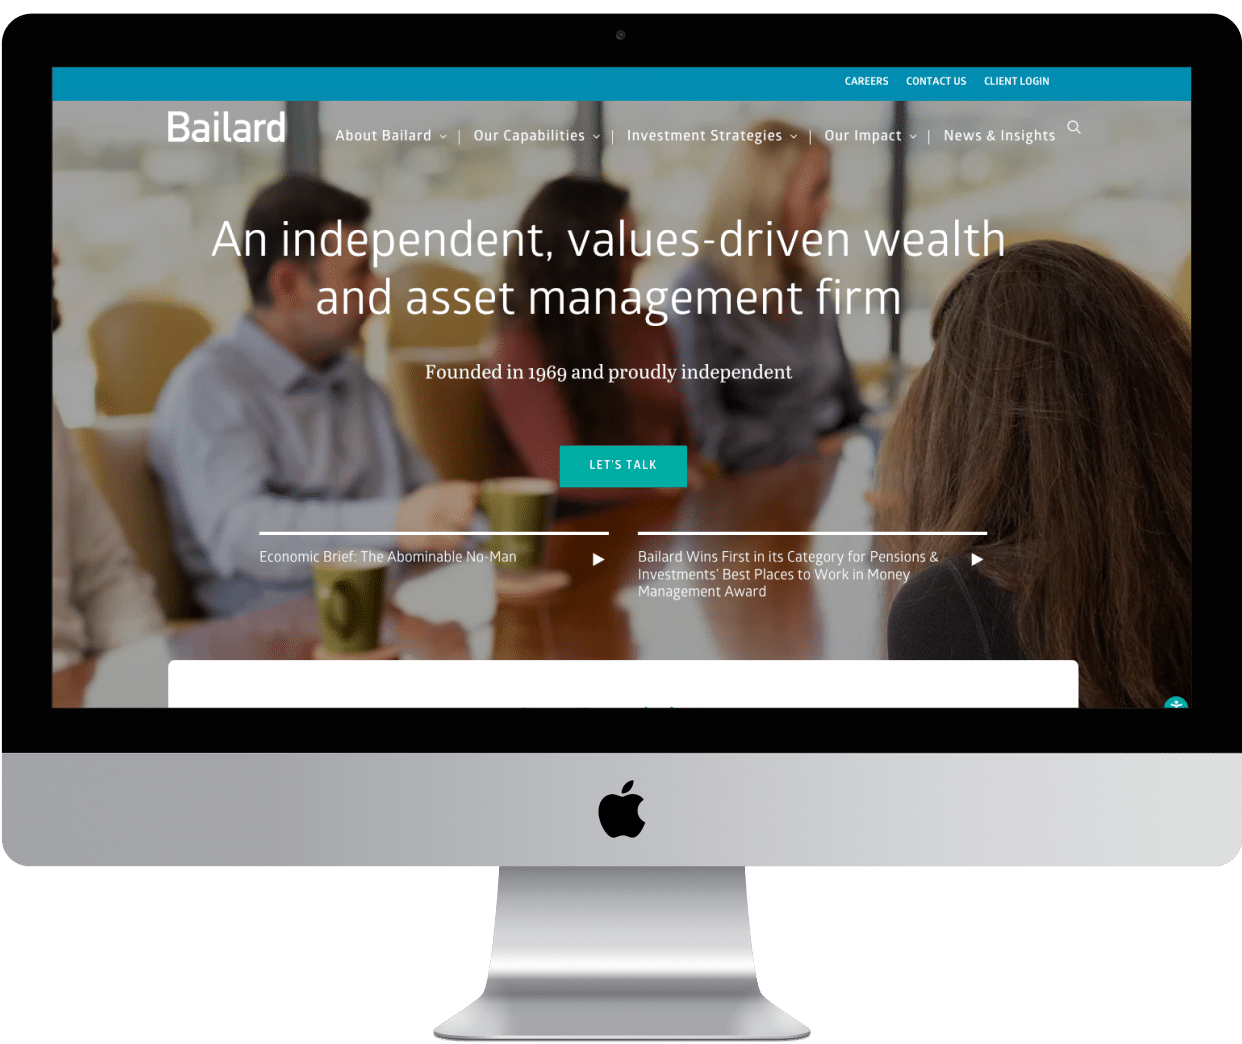 A mockup of the Bailard home page, shown on a Mac desktop computer.